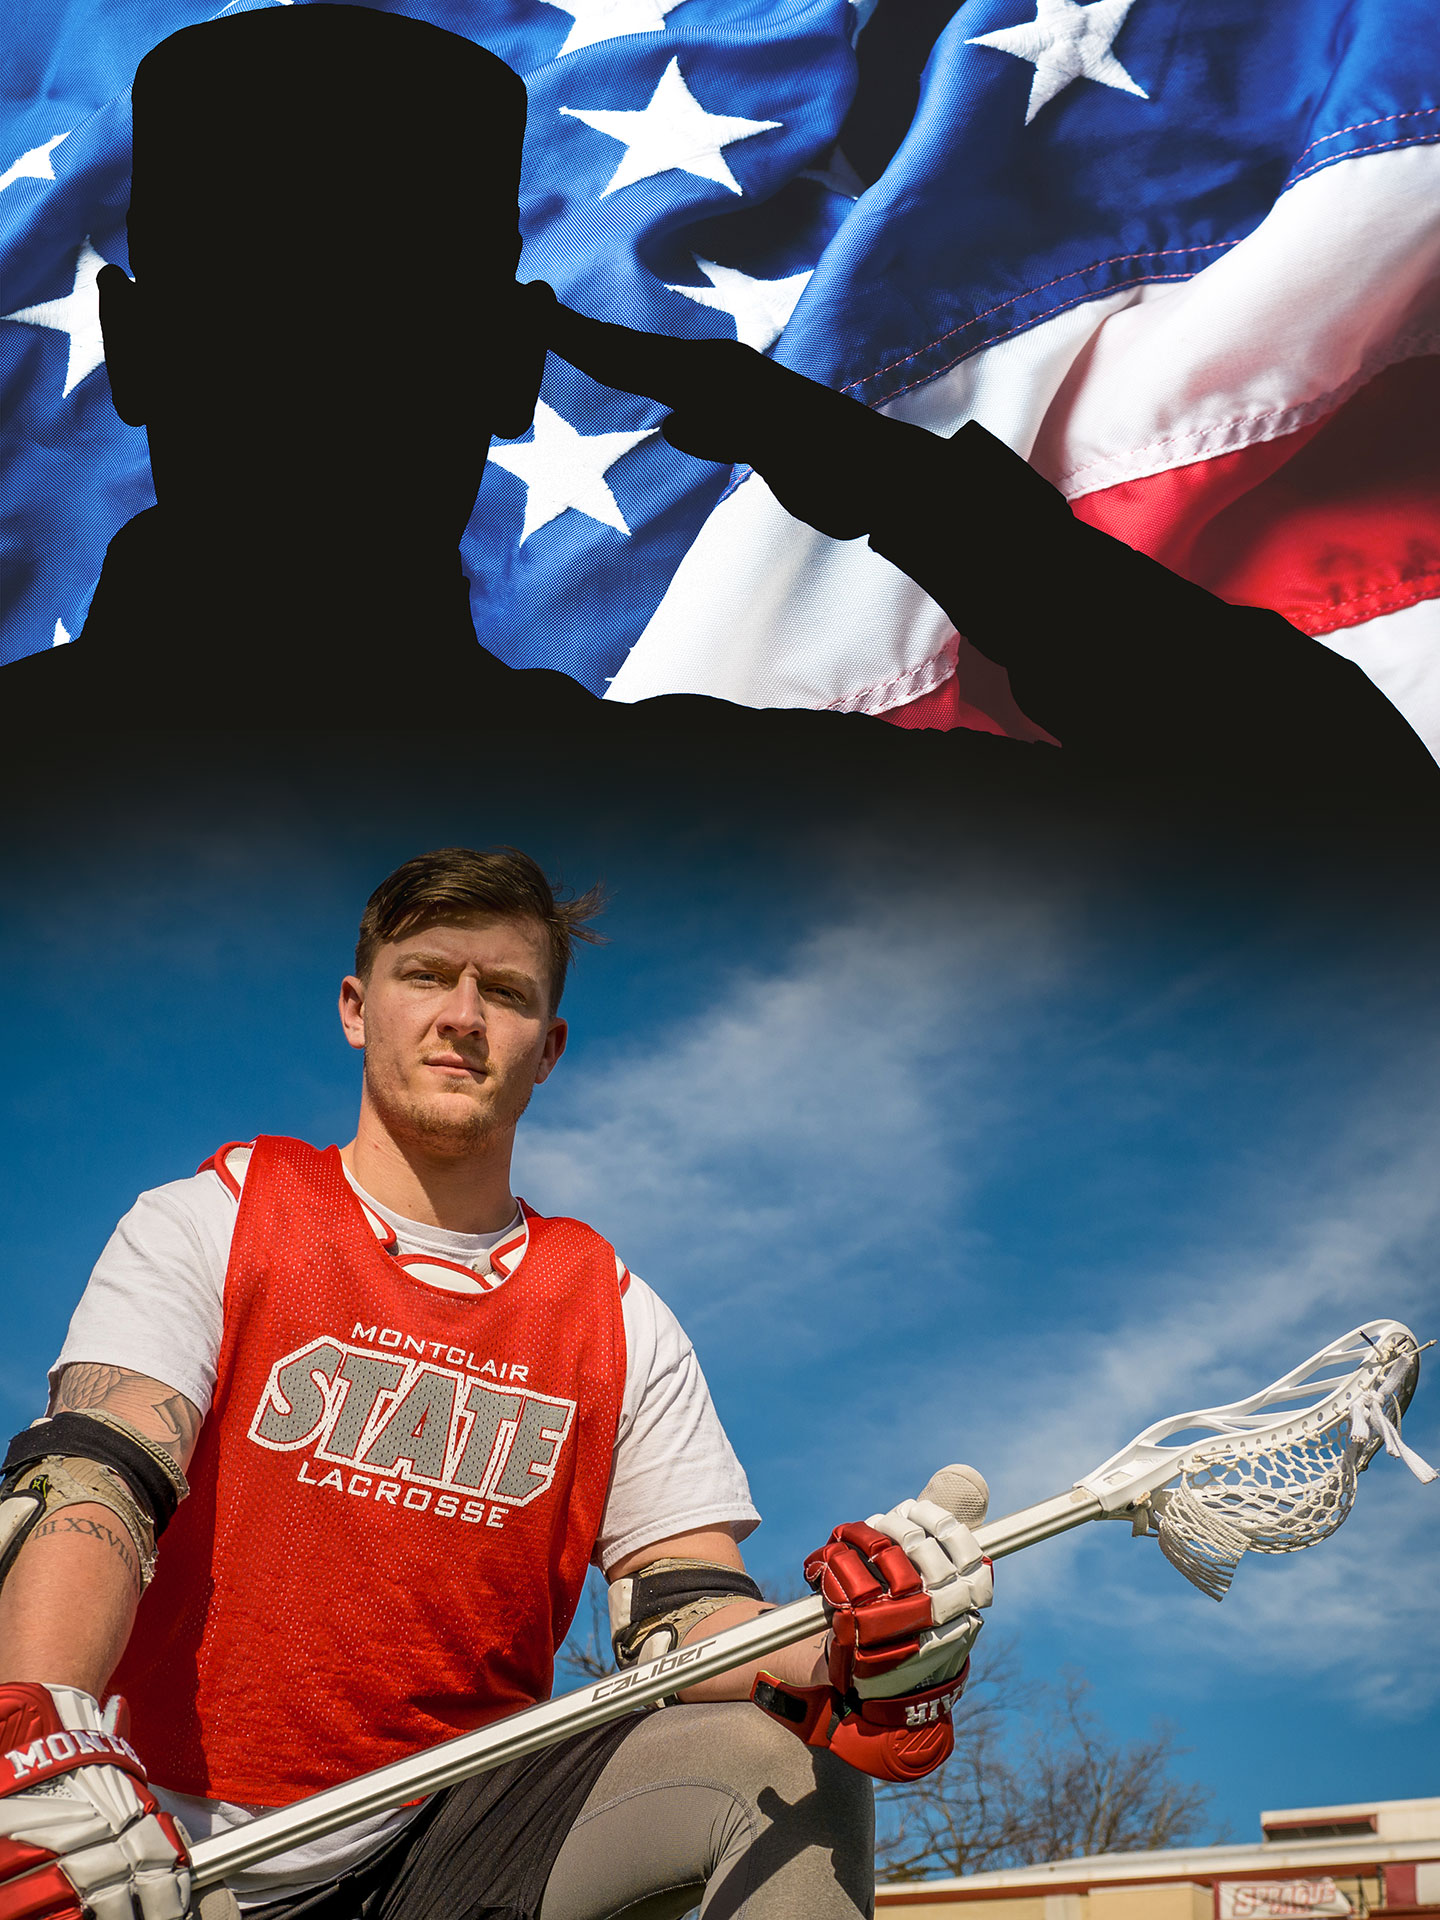 Max Frankovitz clad in lacrosse gear with background image of silhouette of soldier and American flag.